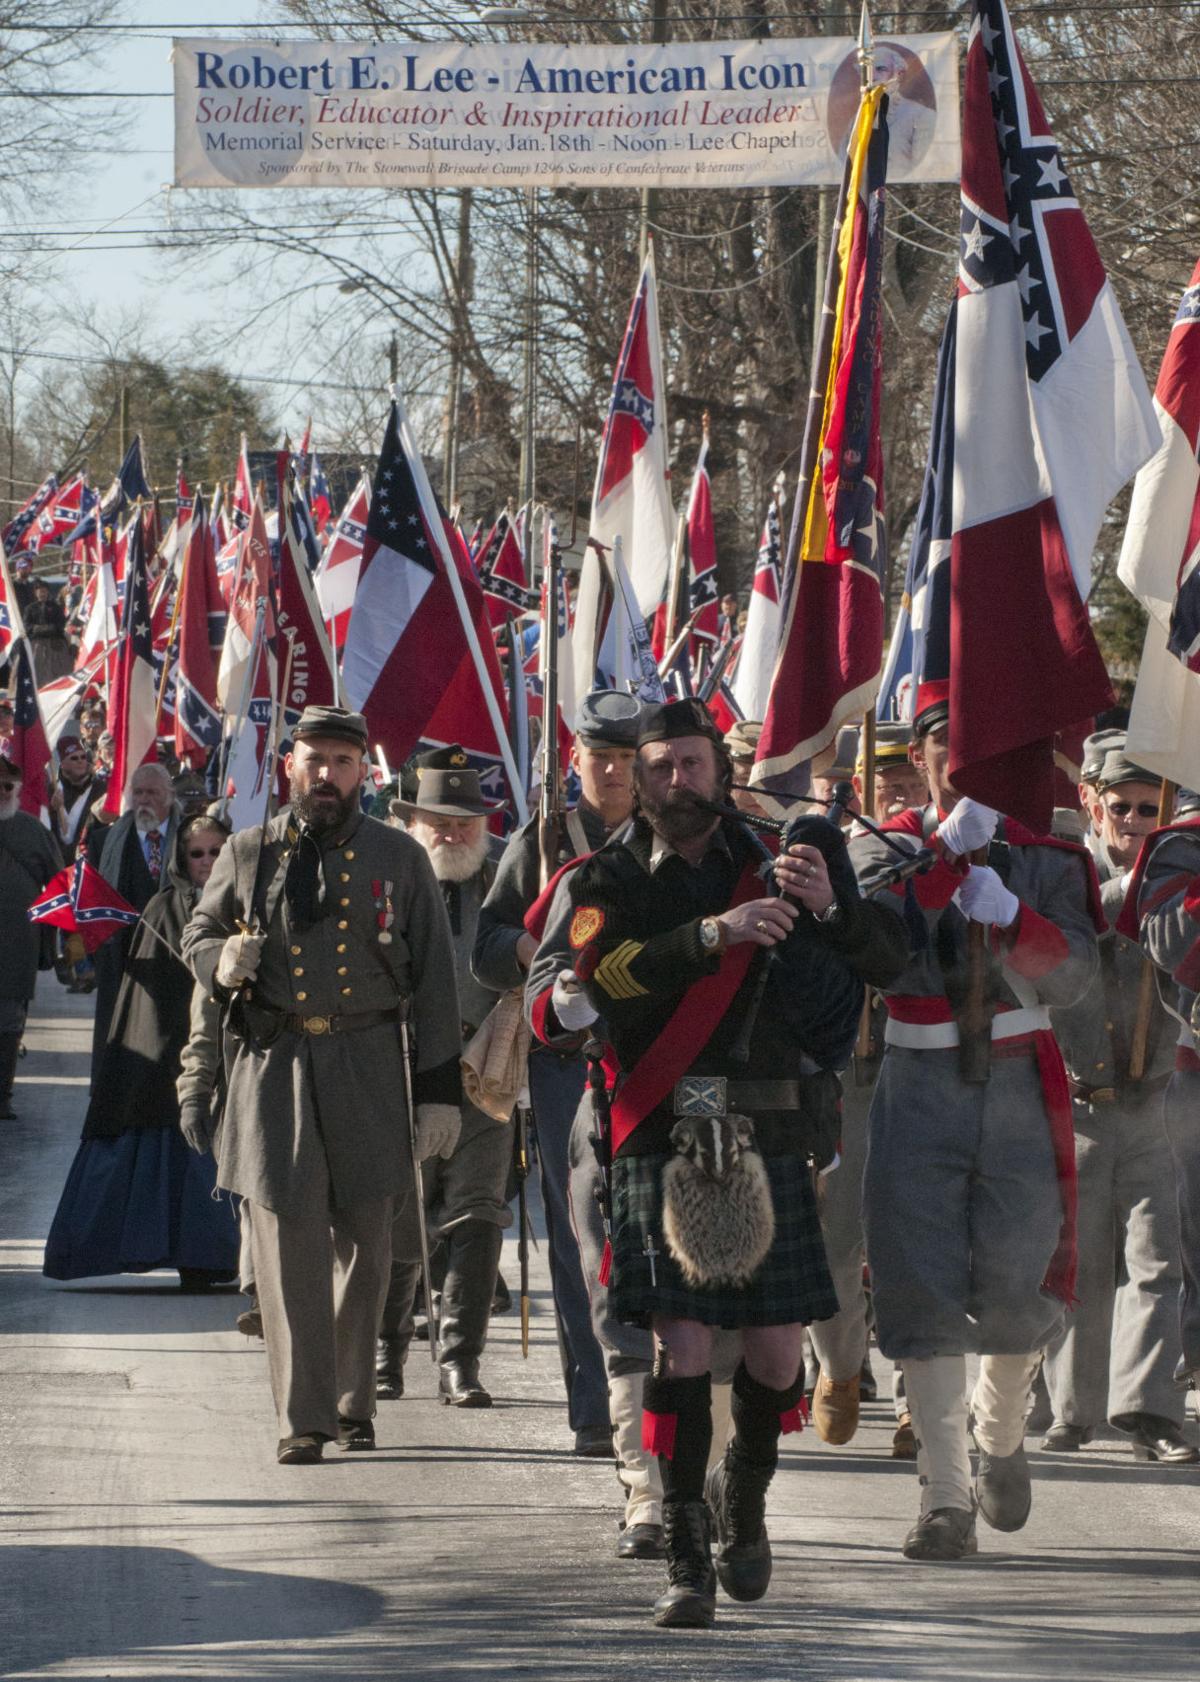 Confederate veterans group granted permit for Lexington parade State